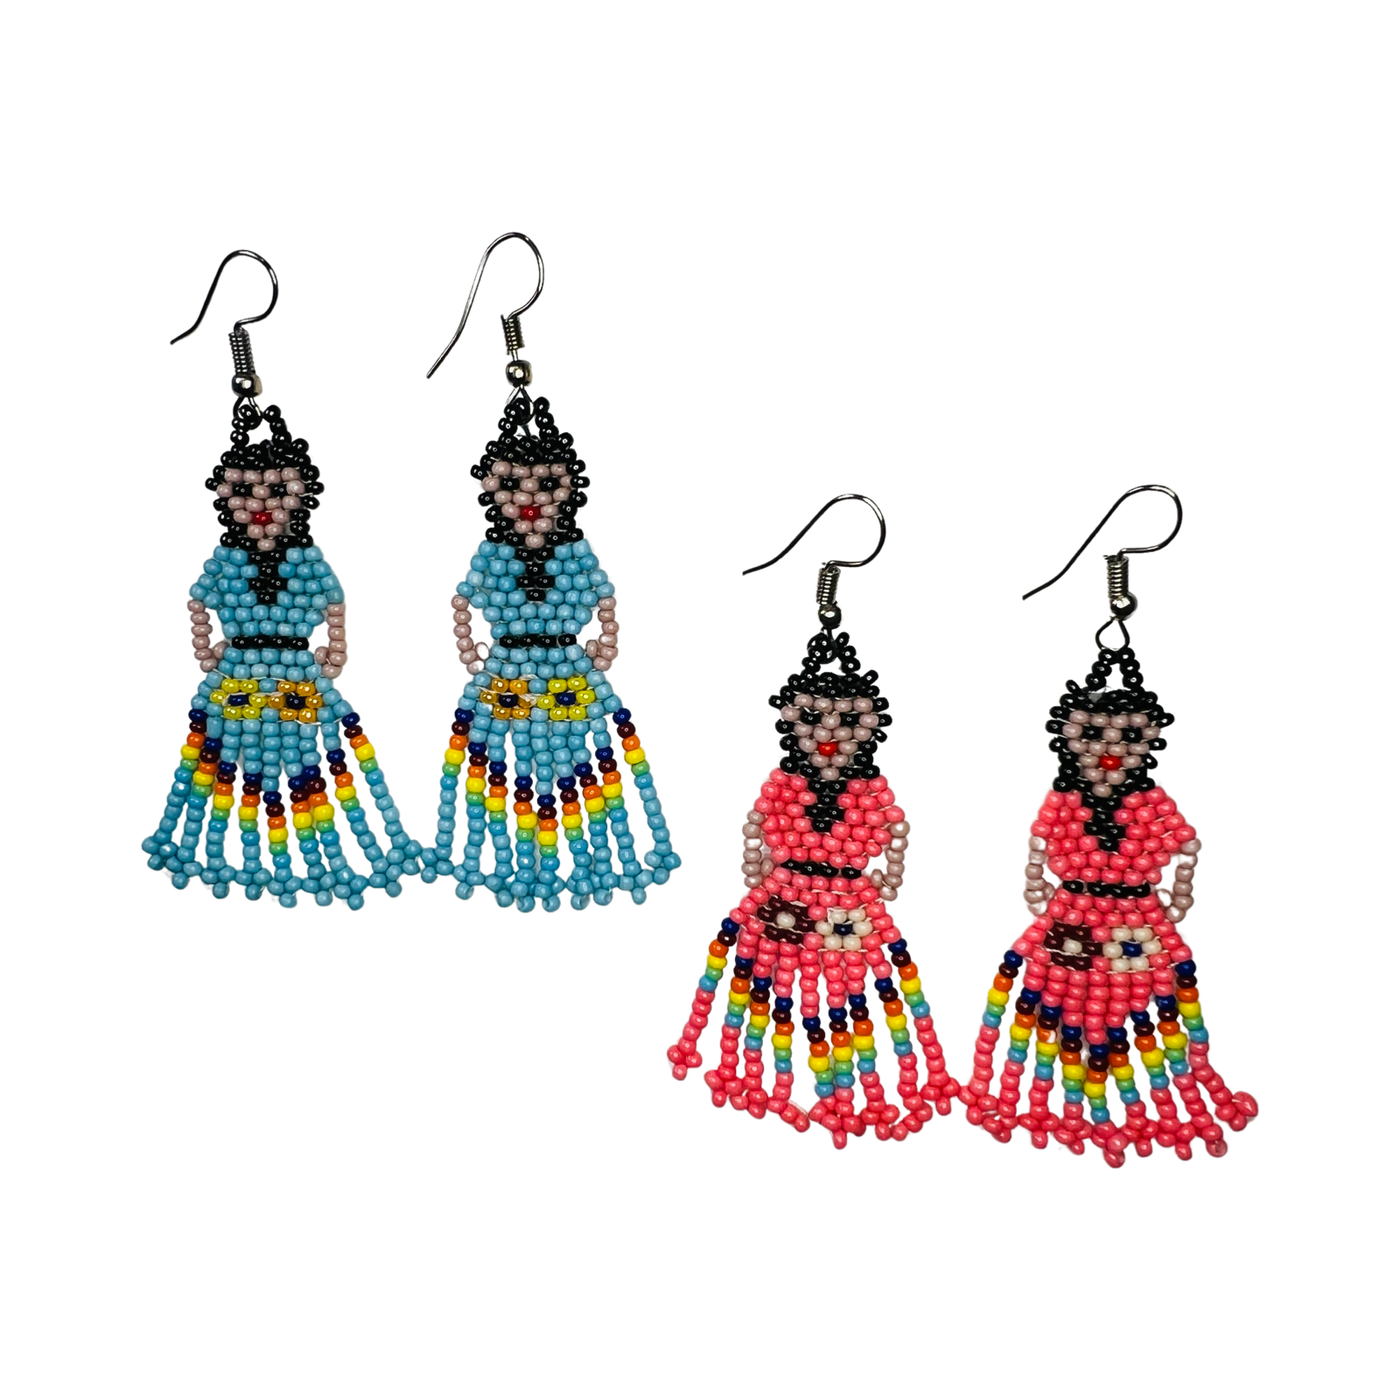 2 sets of seed bead earrings of women in pink and blue outfits.